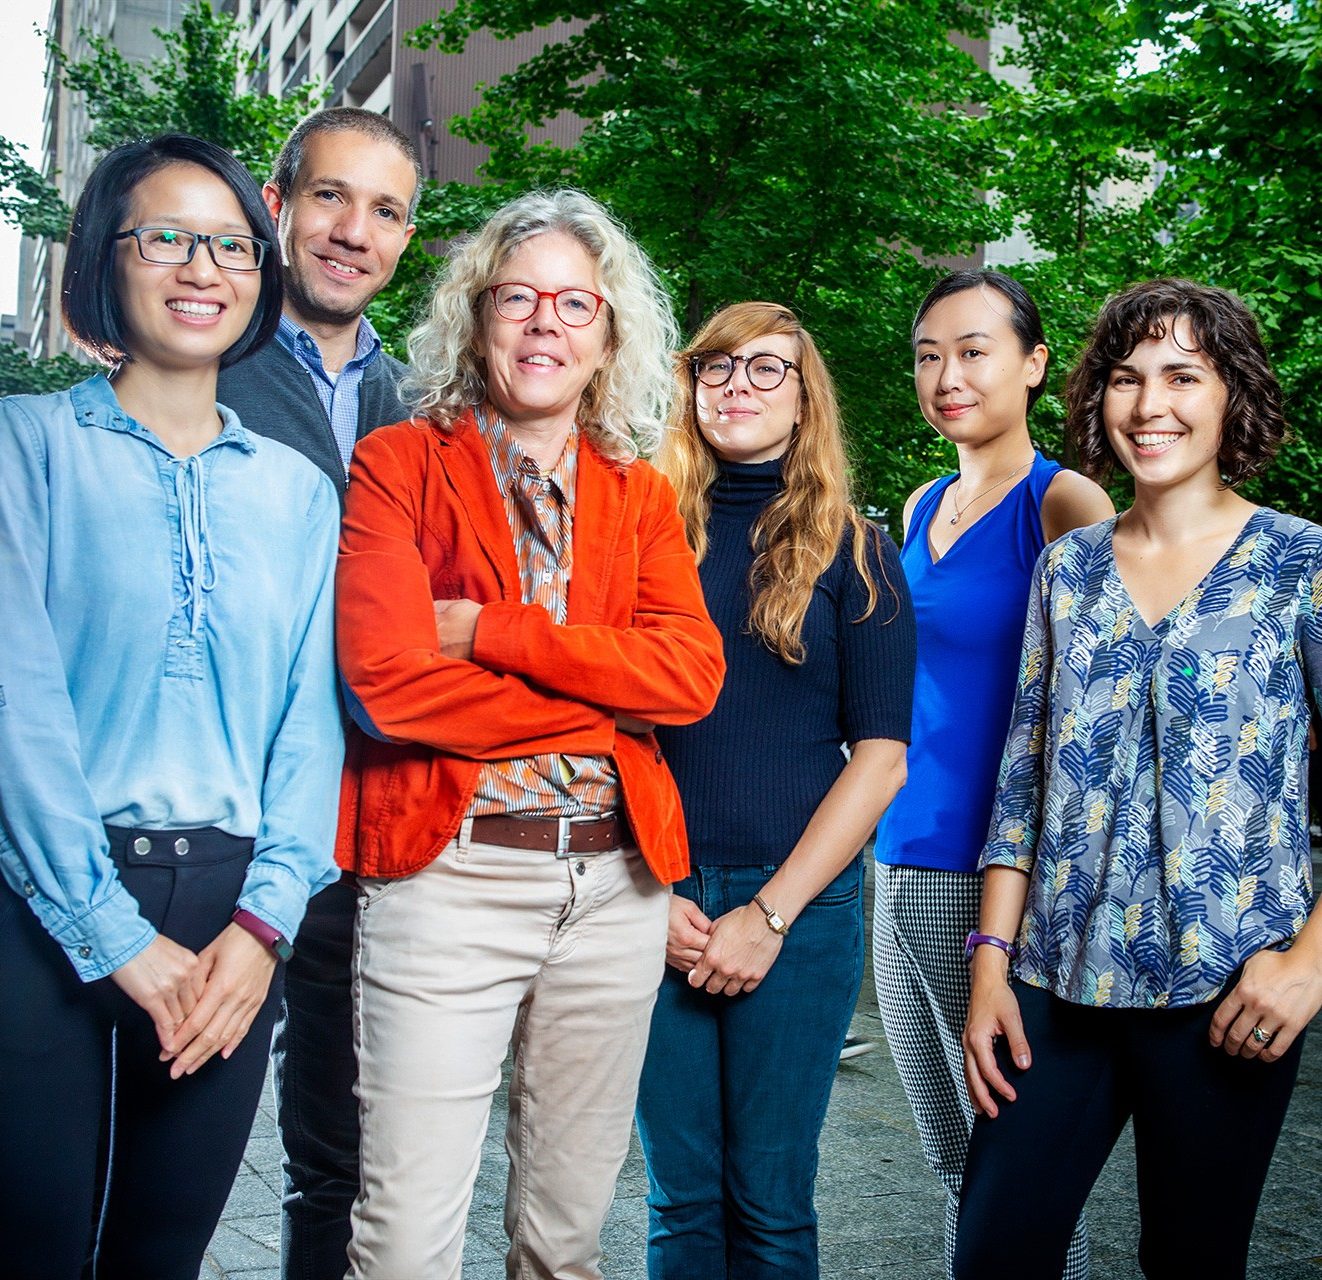 Smart Cities team, from left to right: Chunyan Lai, Mohamed Ouf, Ursula Eicker, Alice Jarry, Jing Hu, Carly Ziter